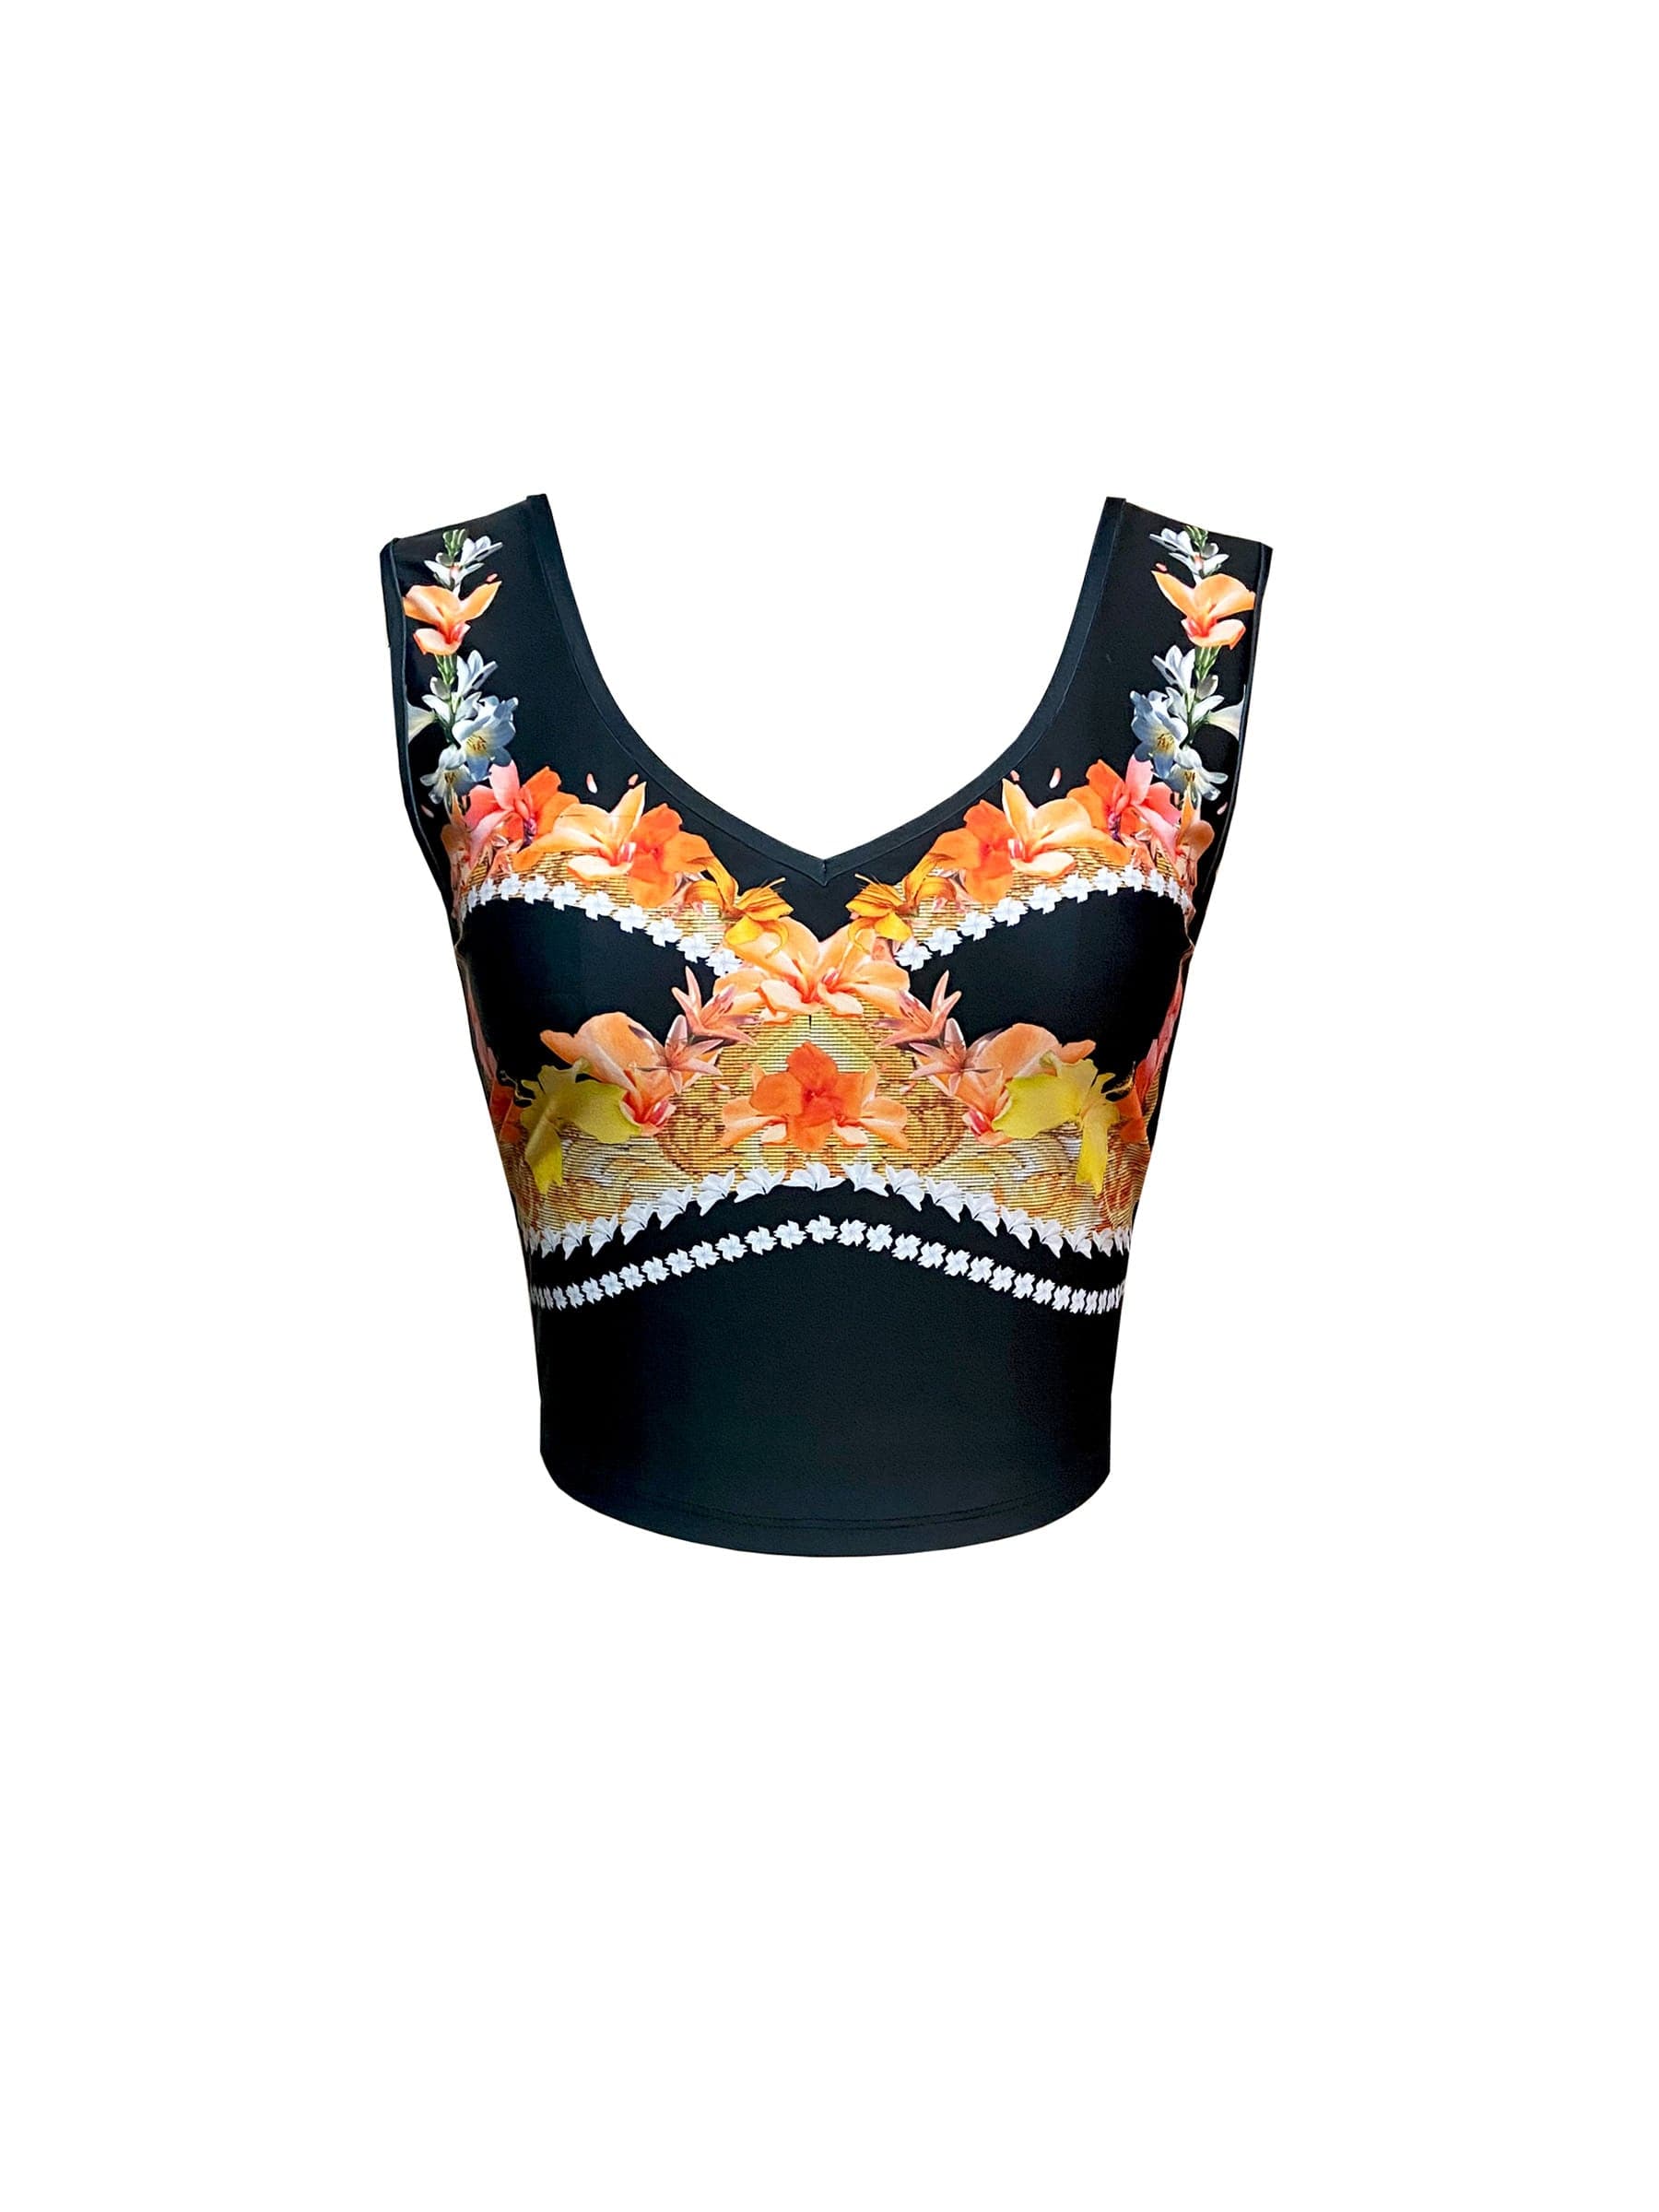 Floral and shell print sustainable black summer tank